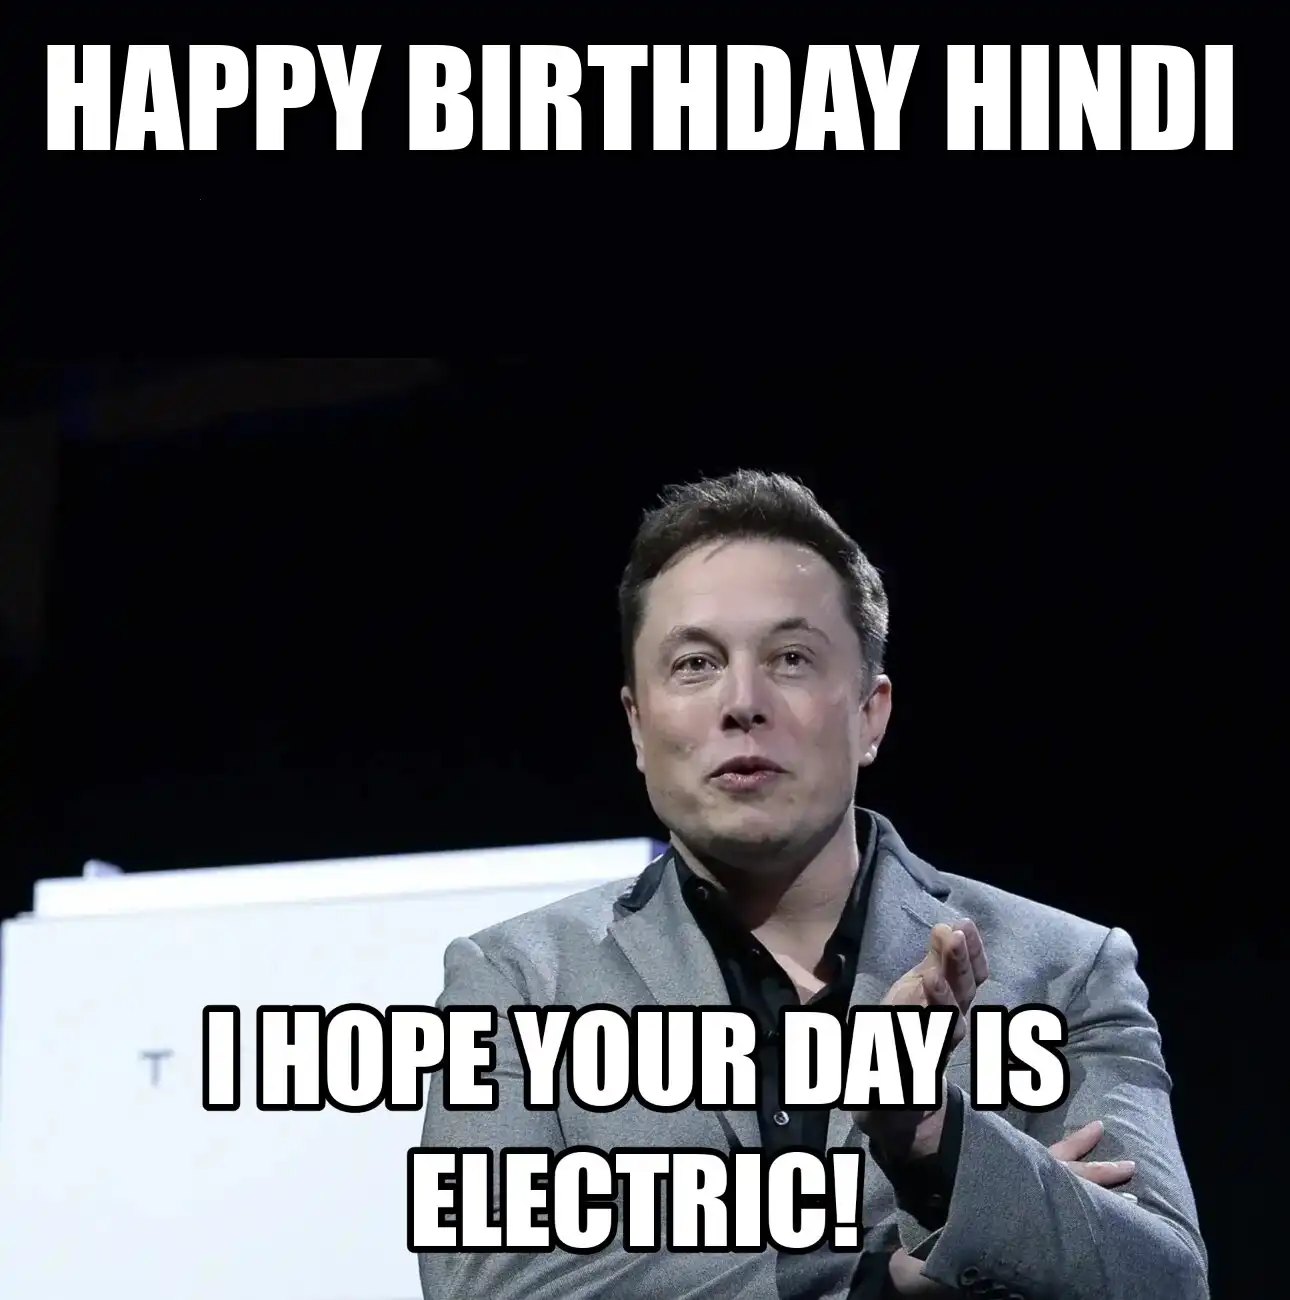 Happy Birthday Hindi I Hope Your Day Is Electric Meme